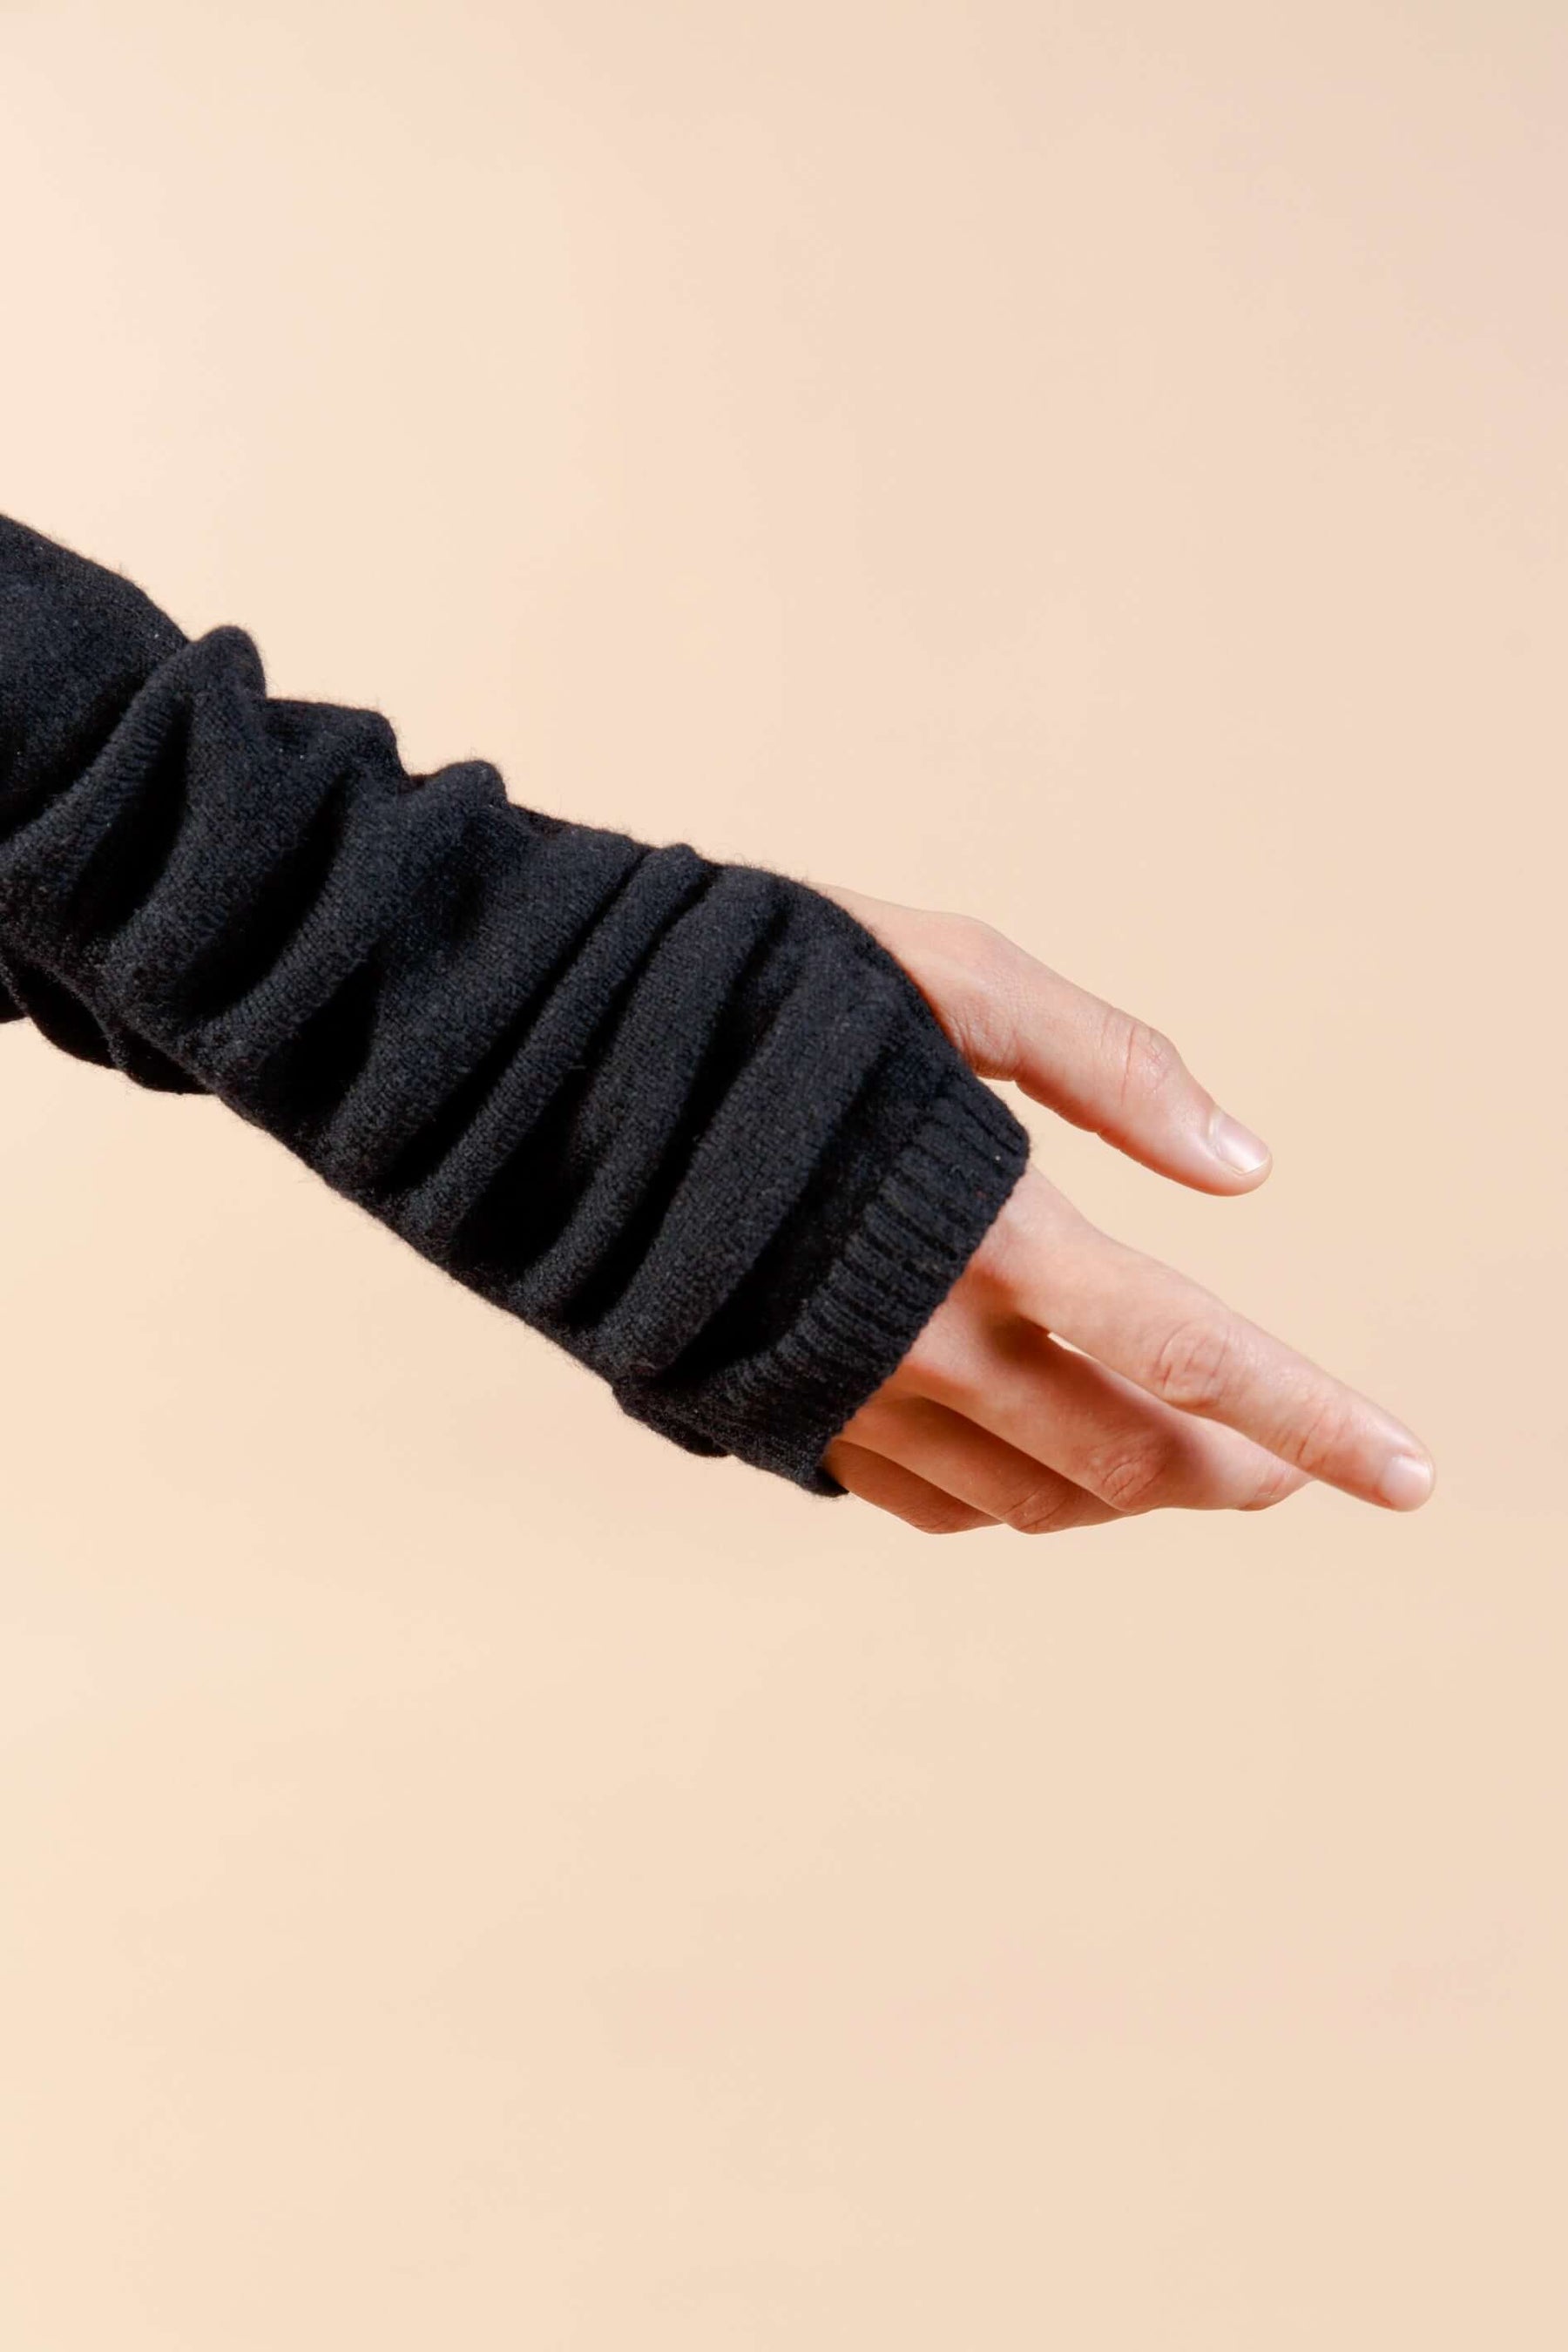 Close up of thumbholes at wrist and sleeve of black cashmere sweater dress